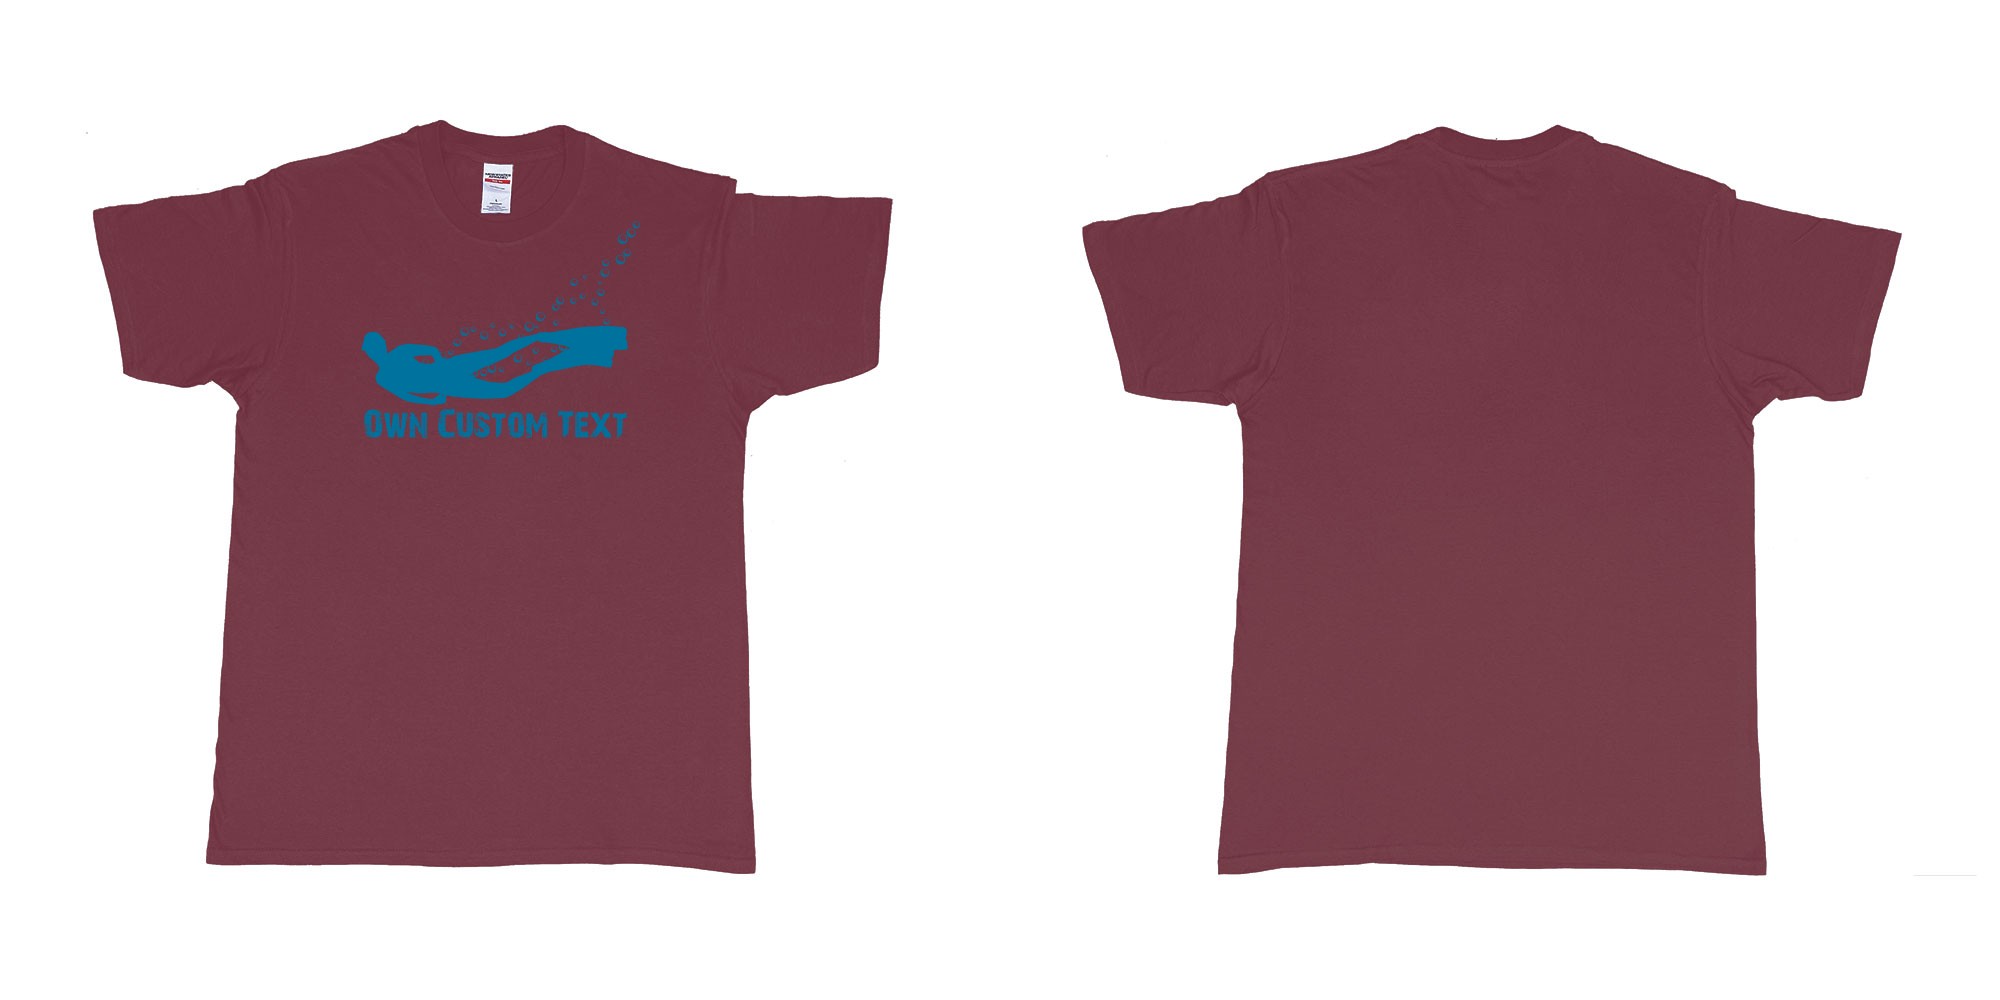 Custom tshirt design freediver bubbles in fabric color marron choice your own text made in Bali by The Pirate Way